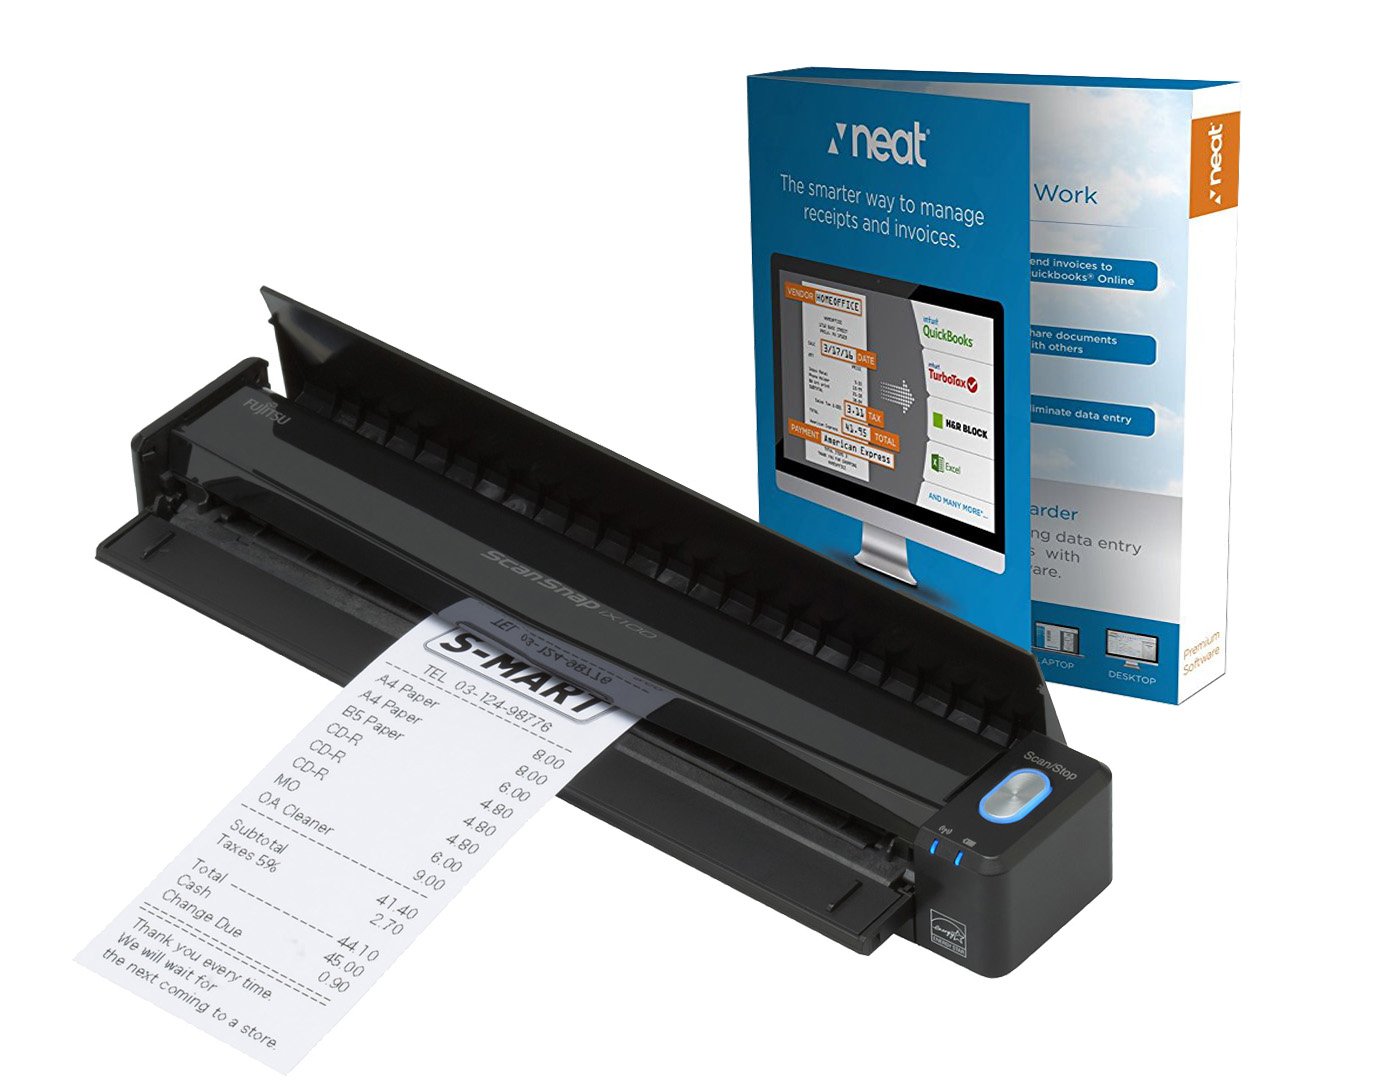 ScanSnap iX100 Mobile Scanner Powered with Neat - CopyFaxes